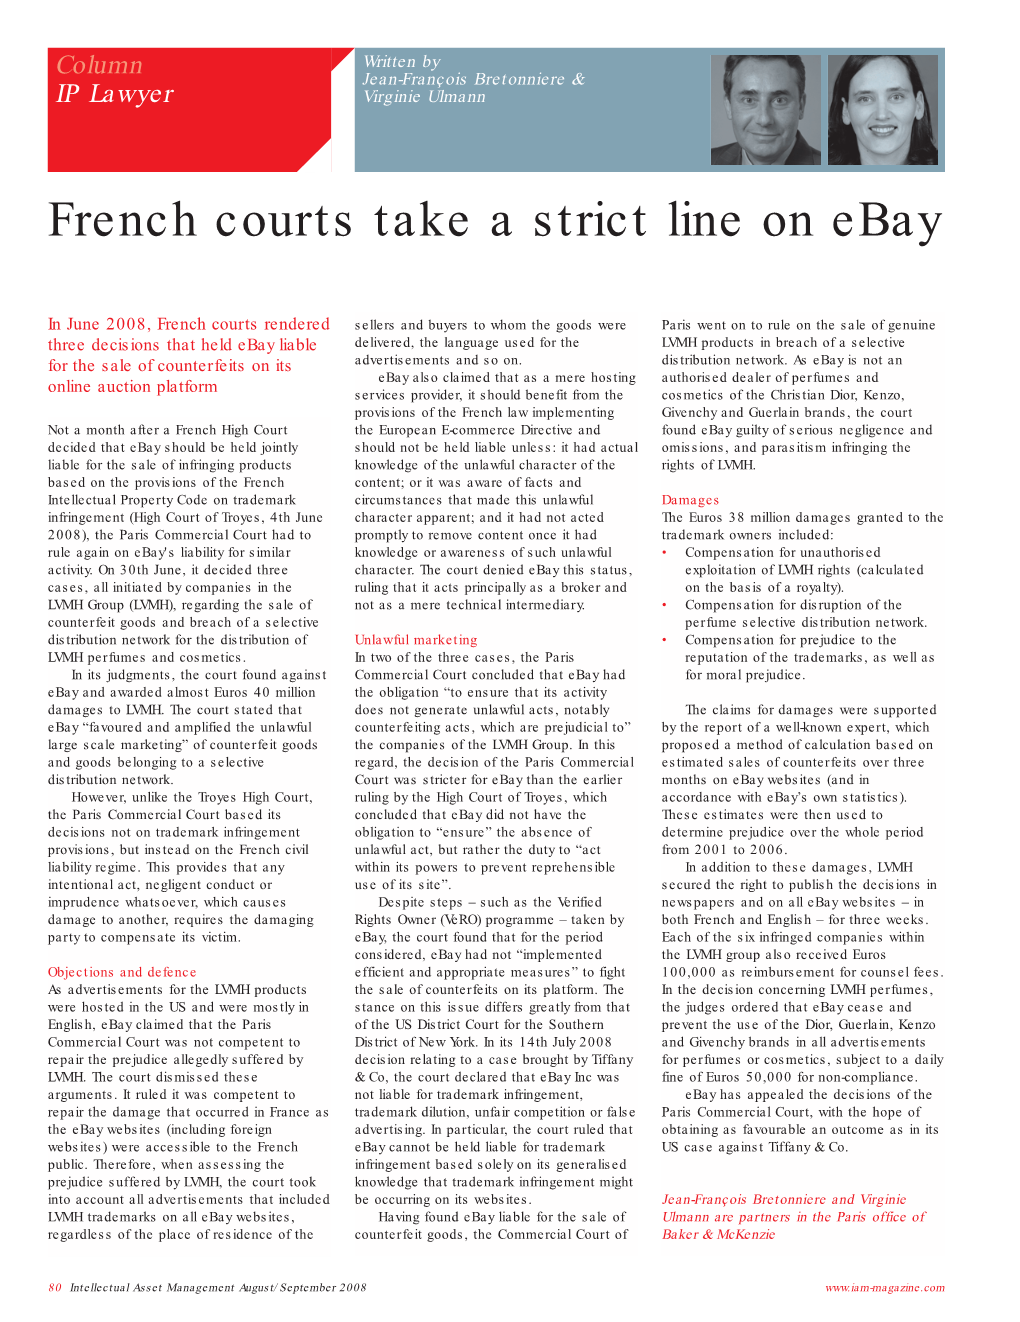 French Courts Take a Strict Line on Ebay